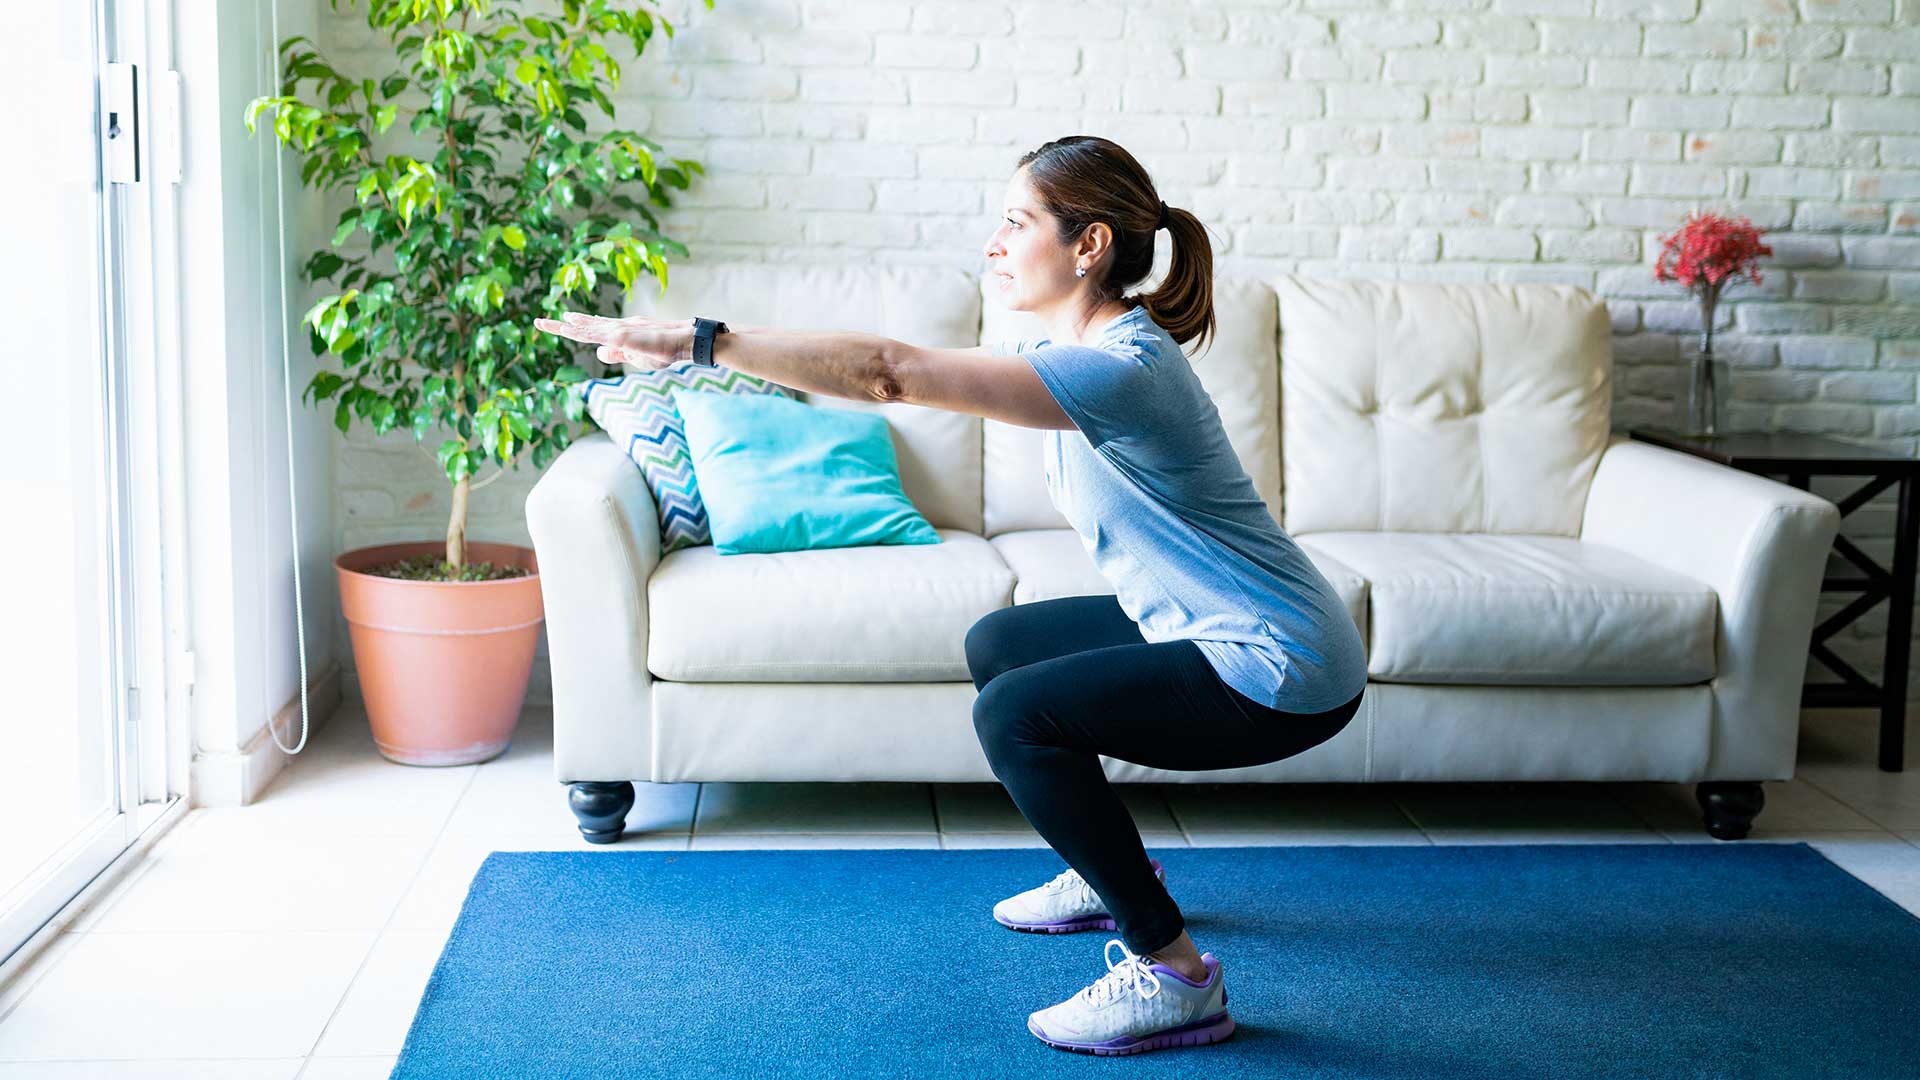 Home Workouts: More Effective Than the Gym?